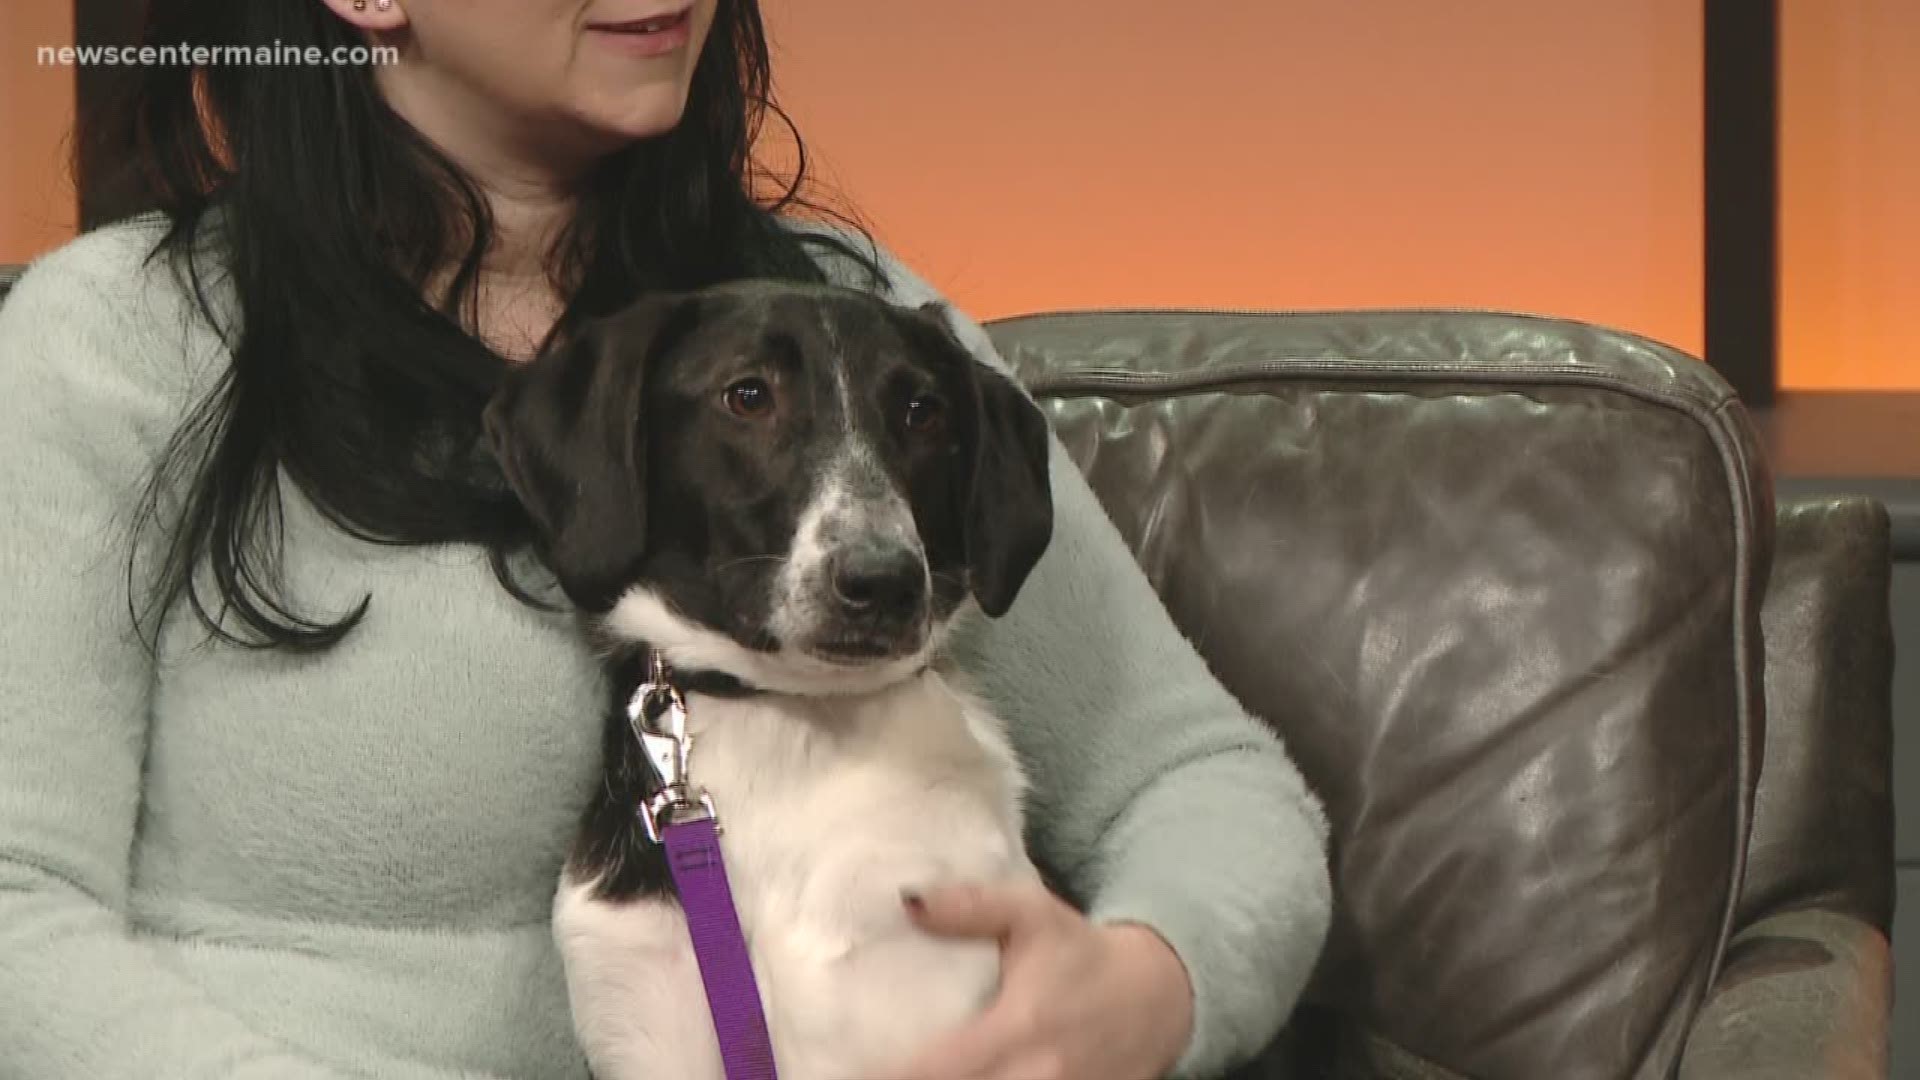 Lilac the dog is available for adoption through Passion for Pets Rescue in Brunswick